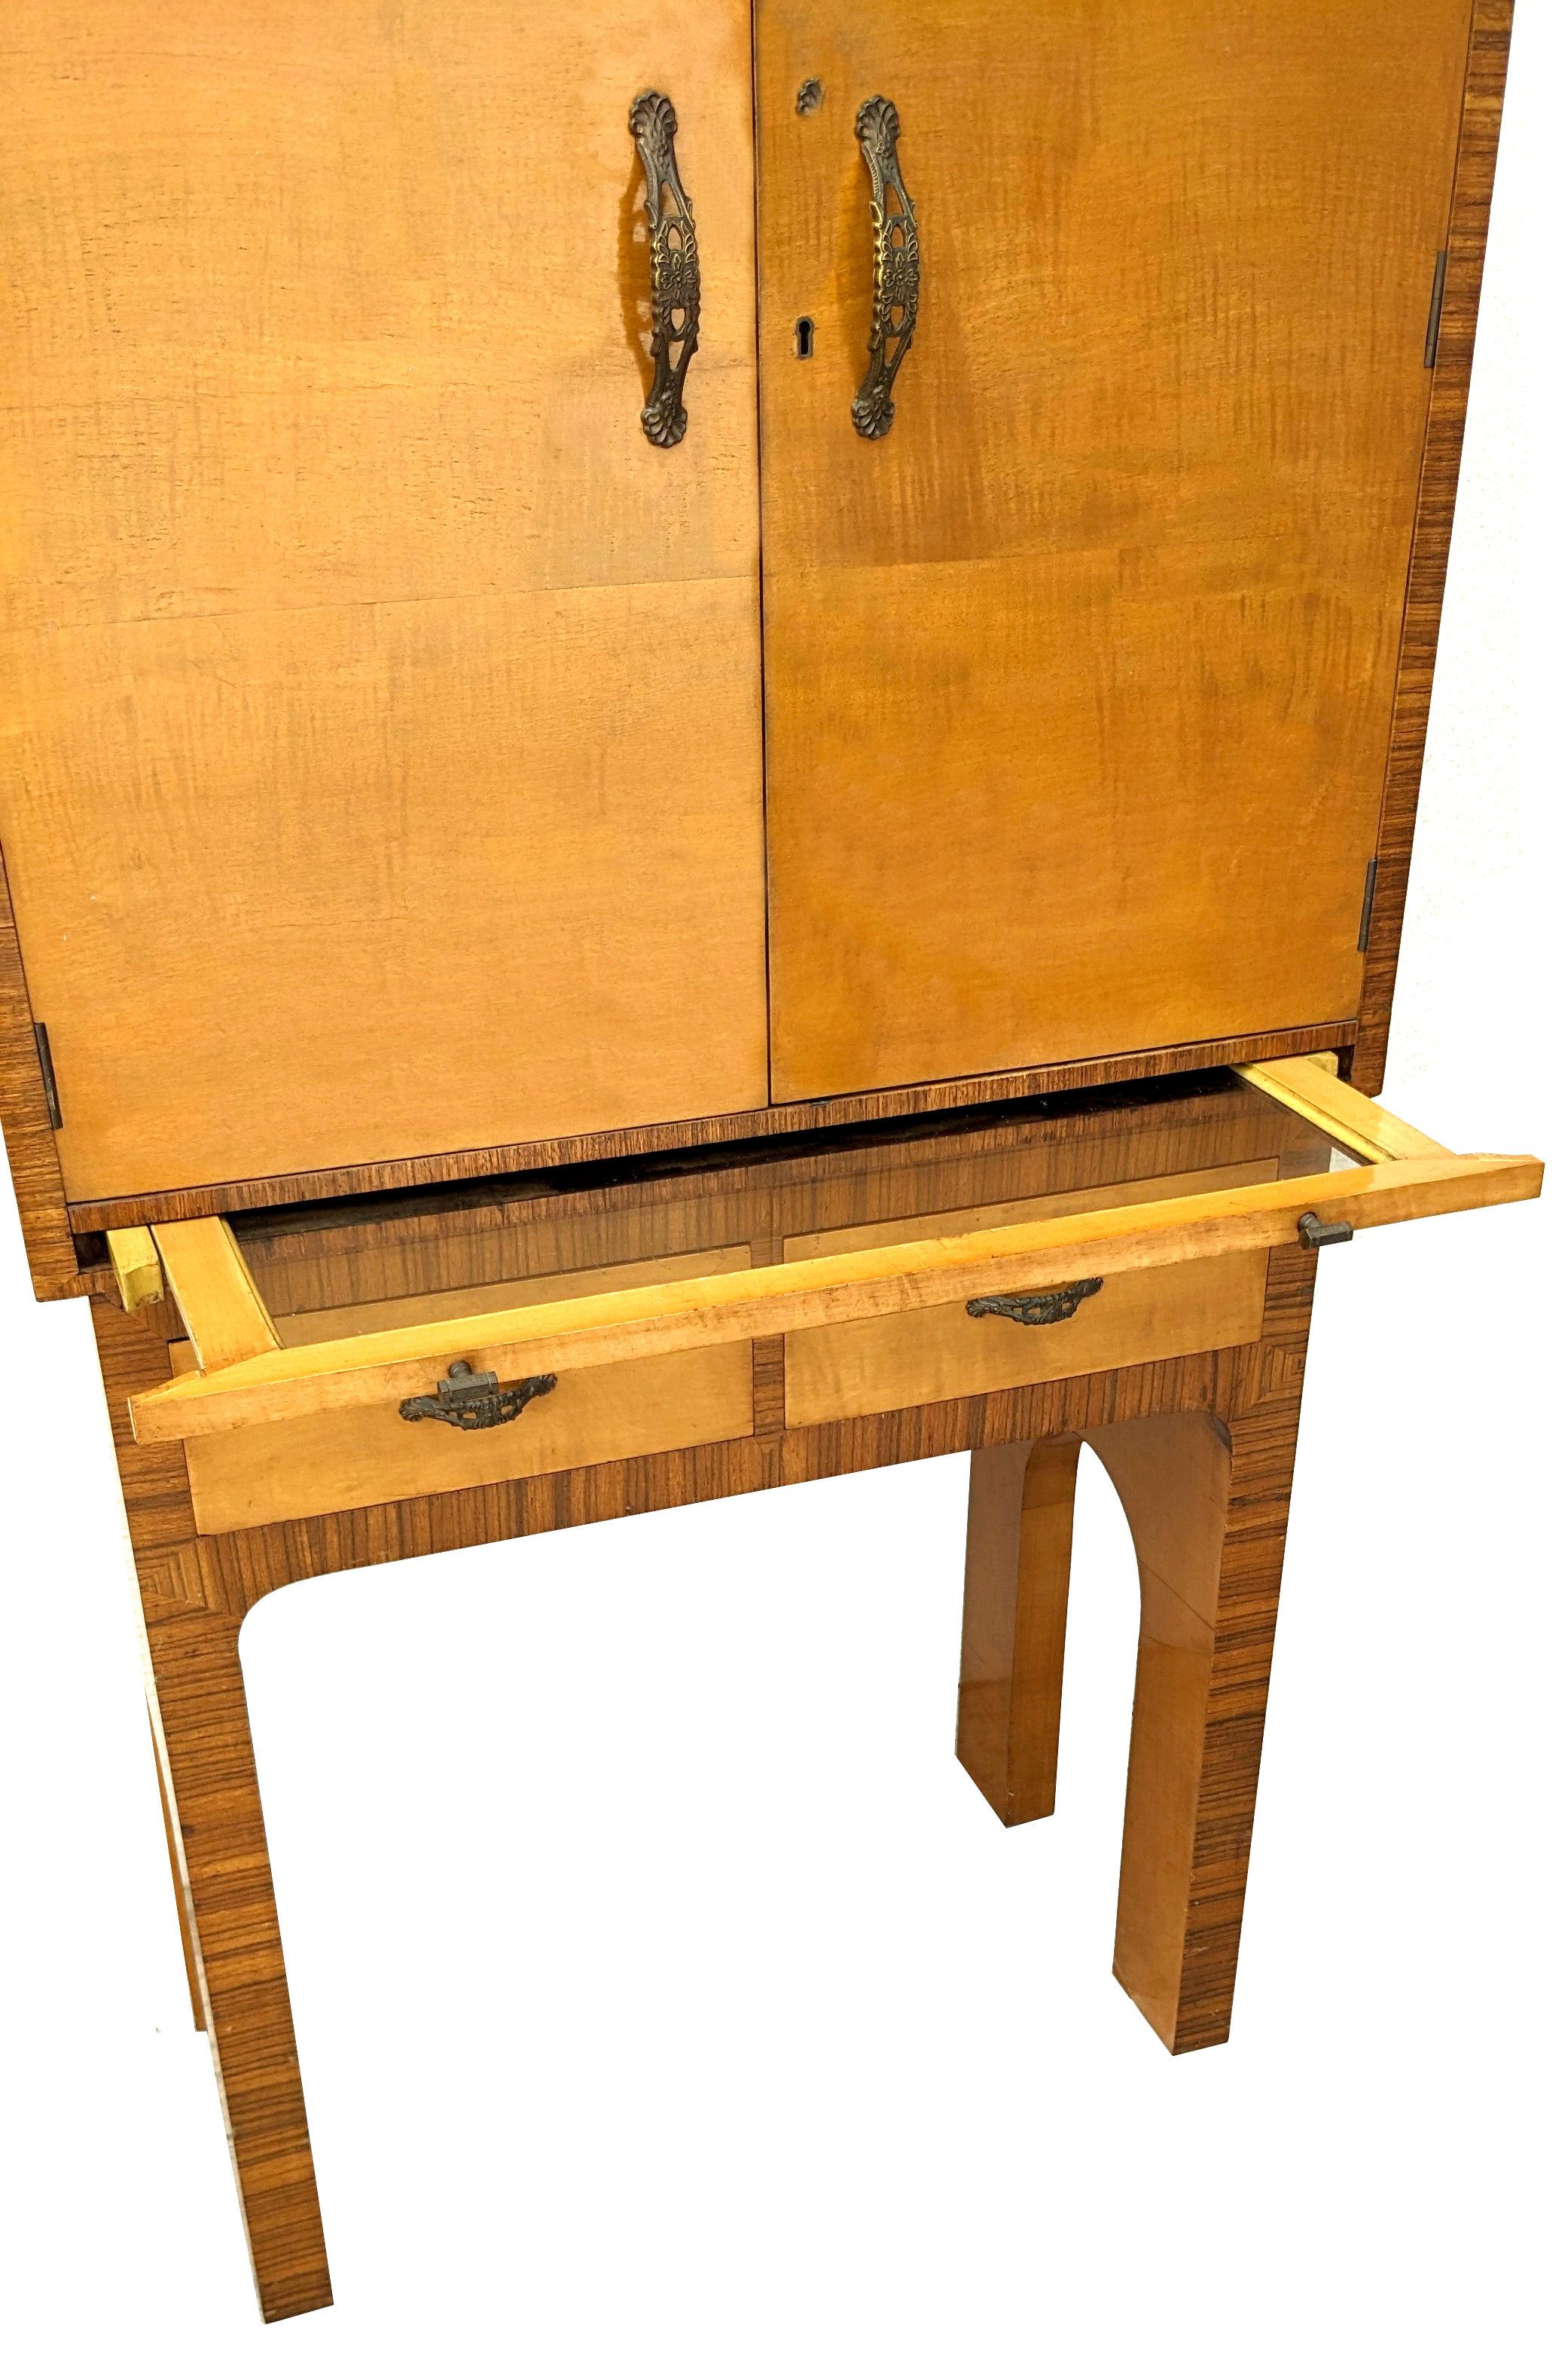 Art Deco Satinwood High End Cocktail Cabinet By Epstein Brothers, c1930 For Sale 1